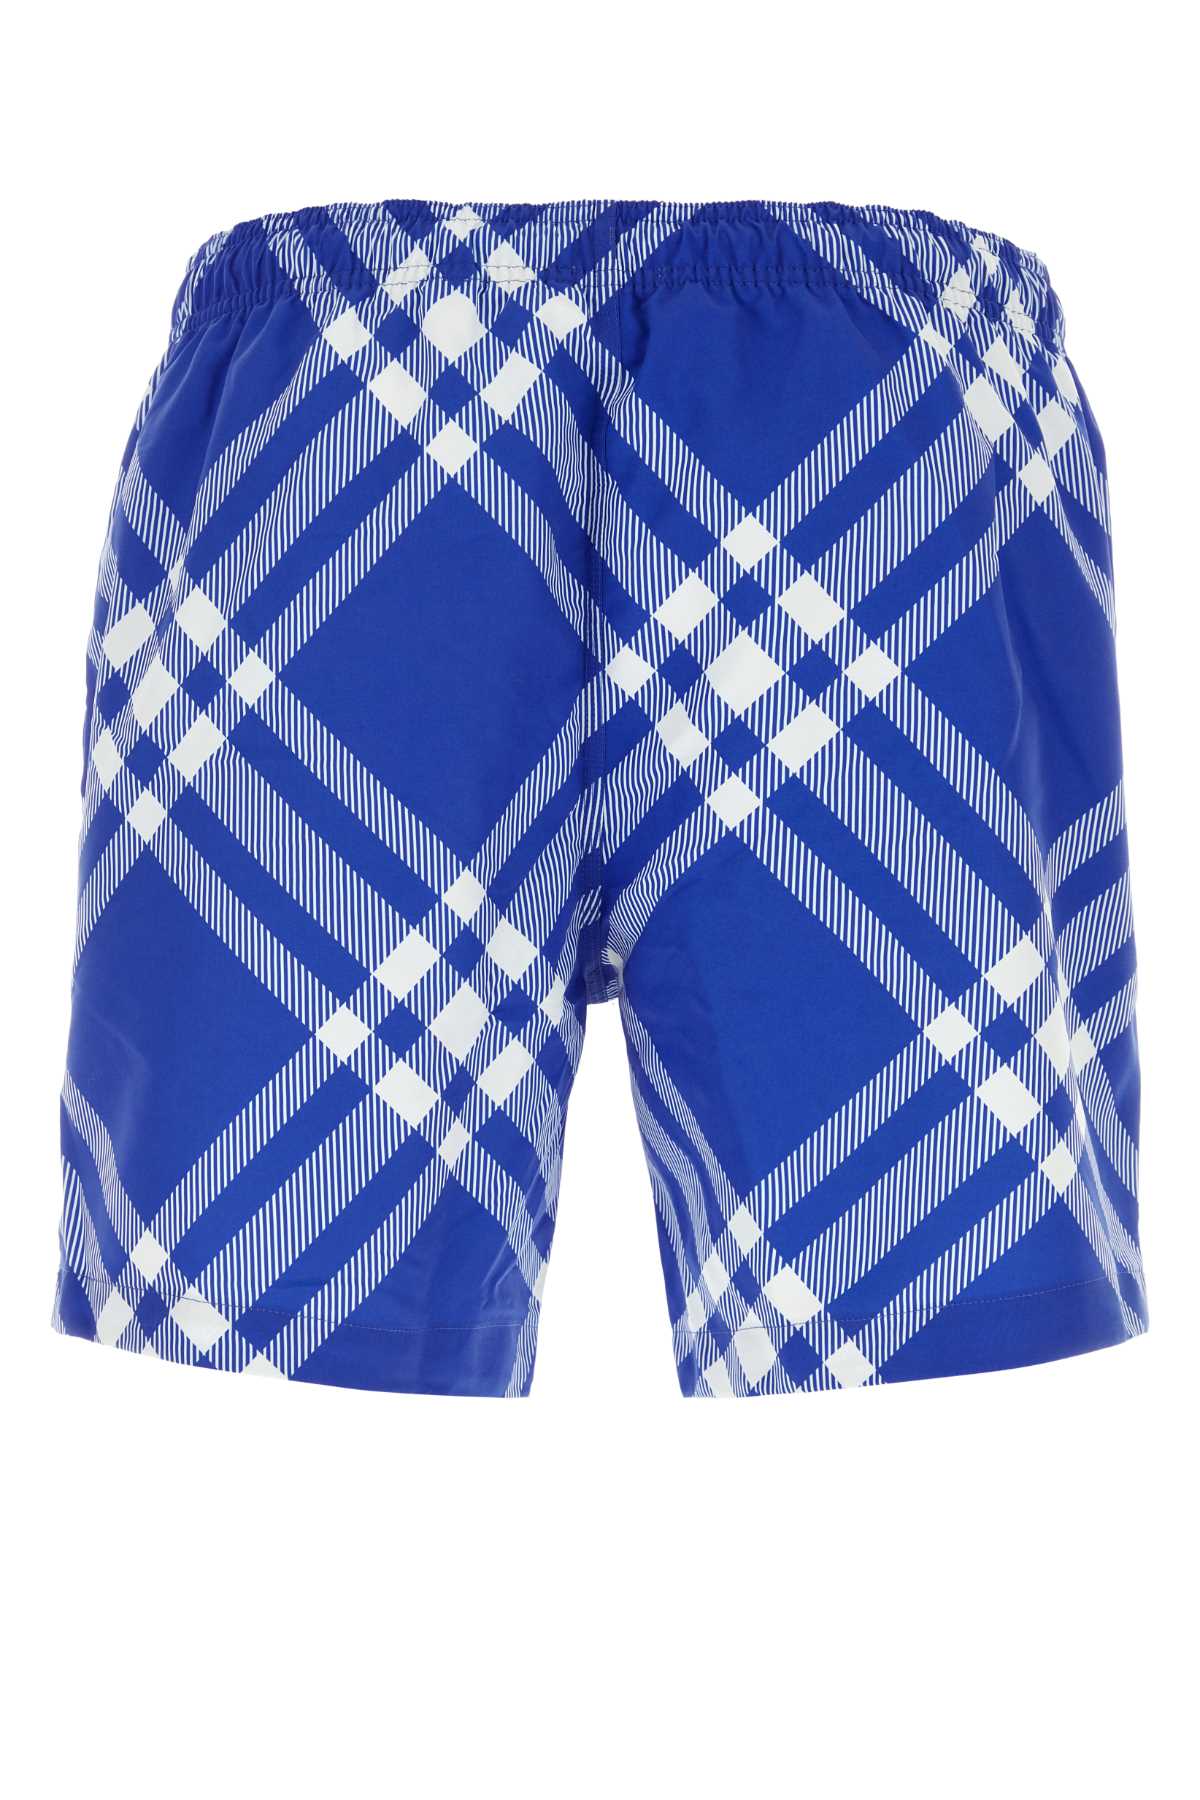 BURBERRY PRINTED POLYESTER SWIMMING SHORTS